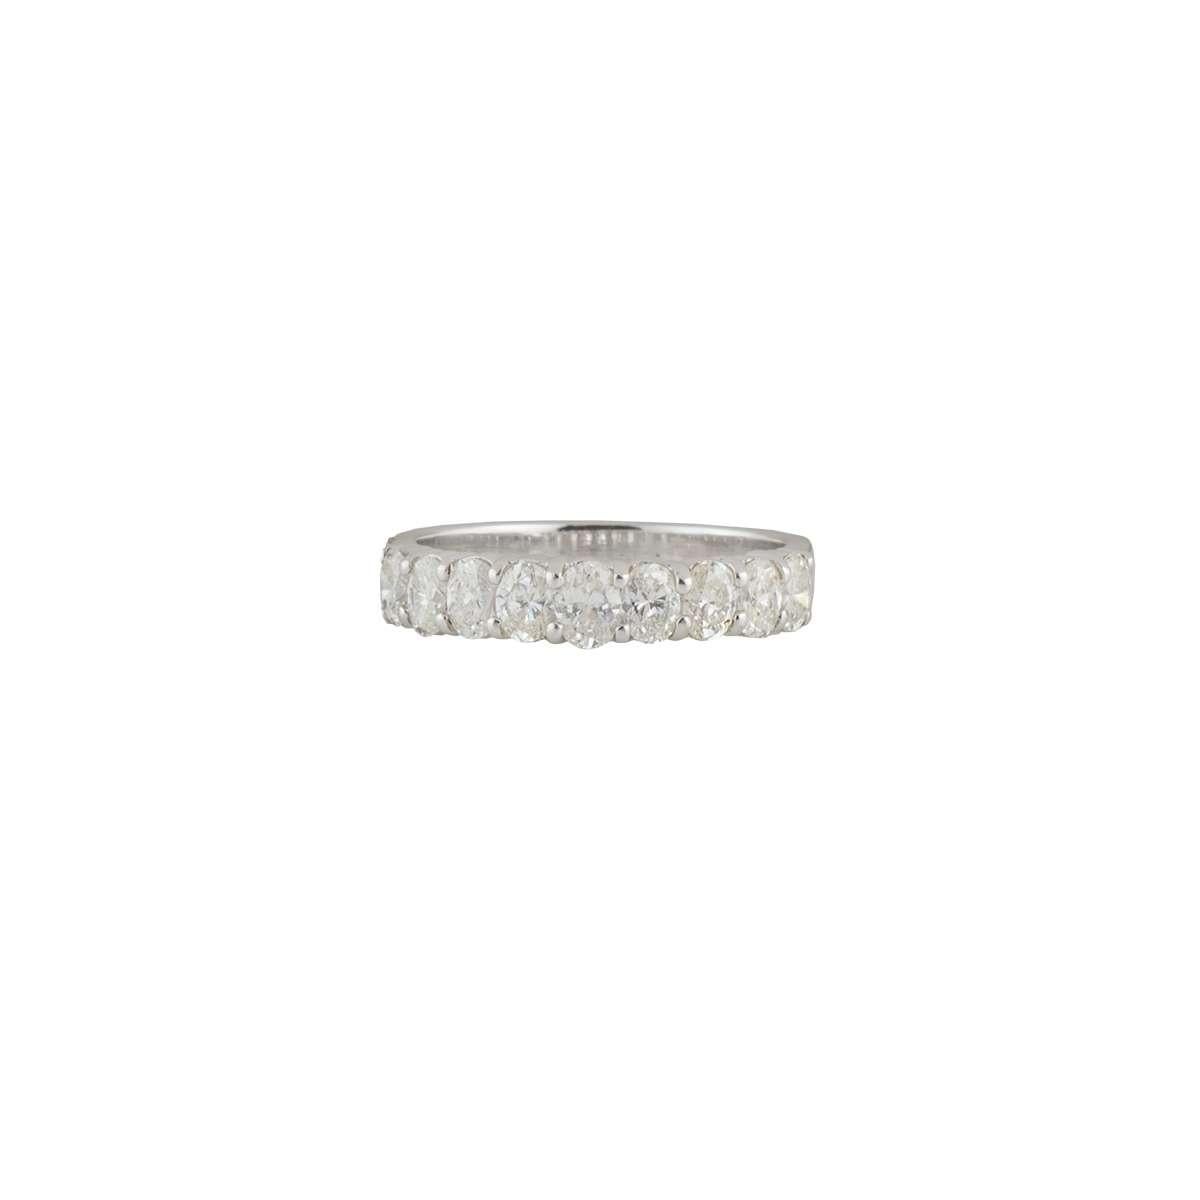 A traditional 14k white gold diamond eternity ring. The ring features 9 oval cut diamonds in a shared prong setting totalling to a weight of 1.08ct, G-I colour and VS-SI clarity. The ring is a size UK N/EU 53/US 6.5 but can be adjusted for a perfect